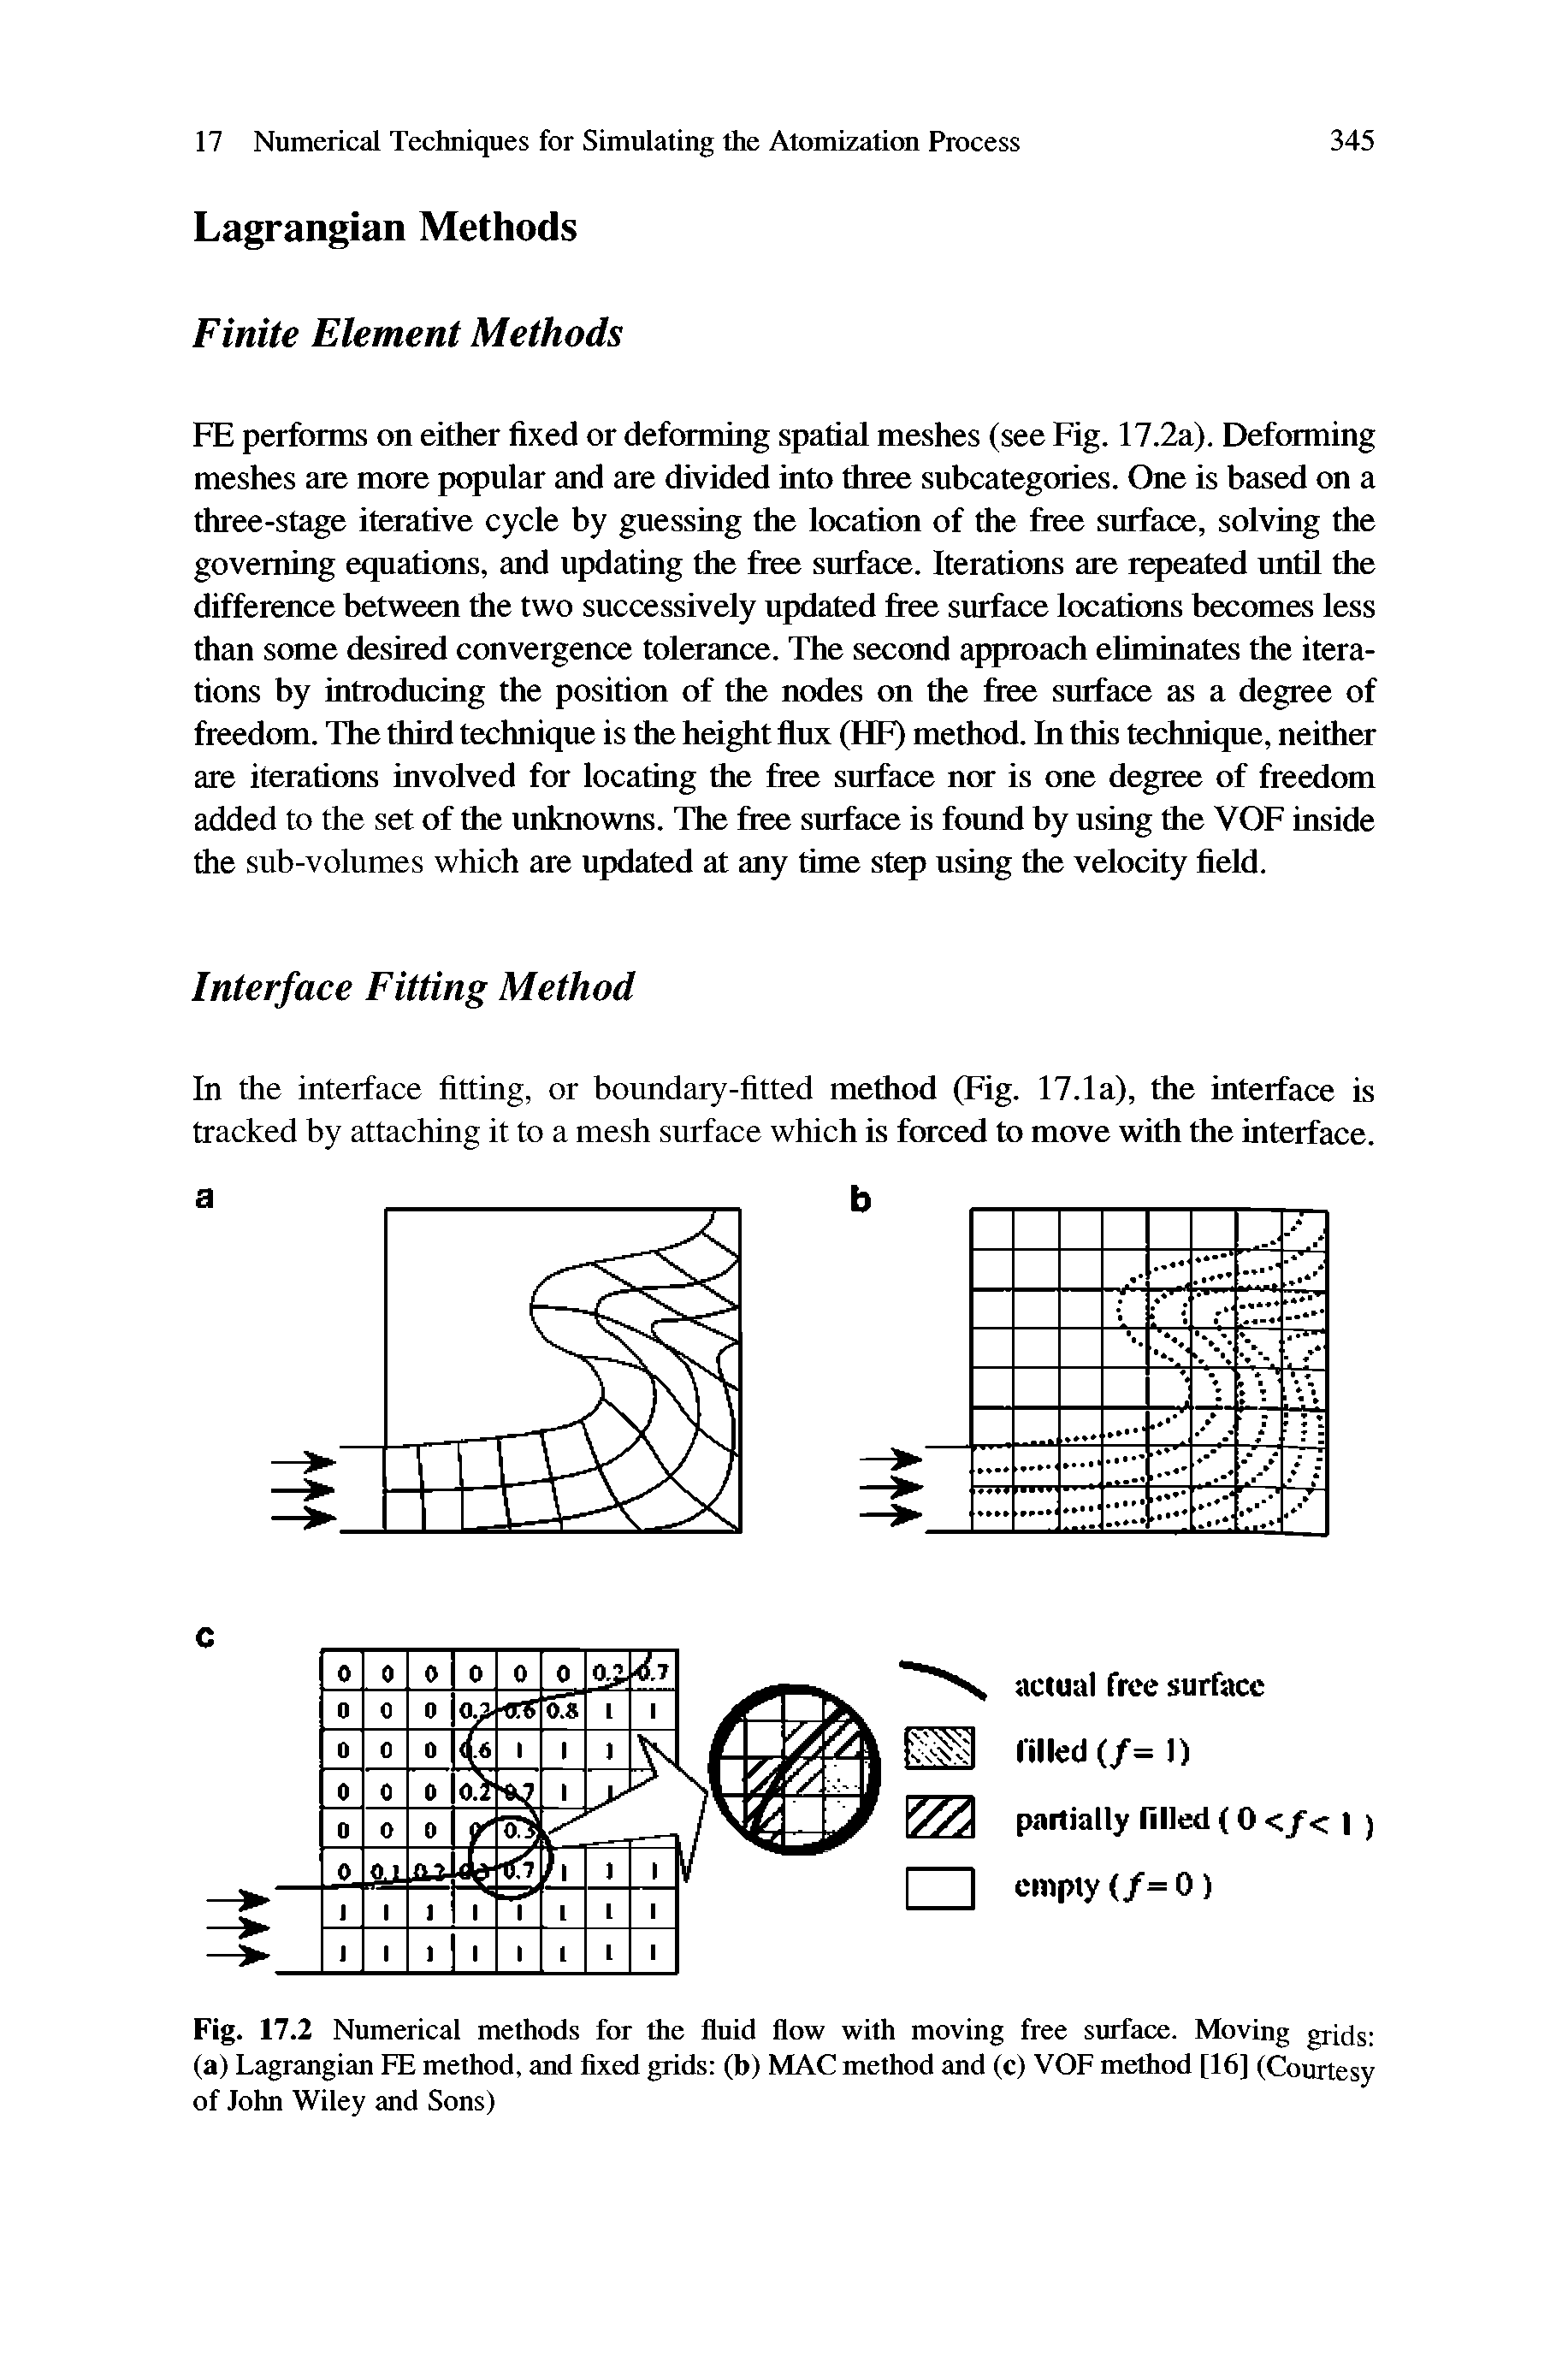 Fig. 17.2 Numerical methods for the fluid flow with moving free surface. Moving grids (a) Lagrangian FE method, and fixed grids (b) MAC method and (c) VOF method [16] (Courtesy of John Wiley and Sons)...